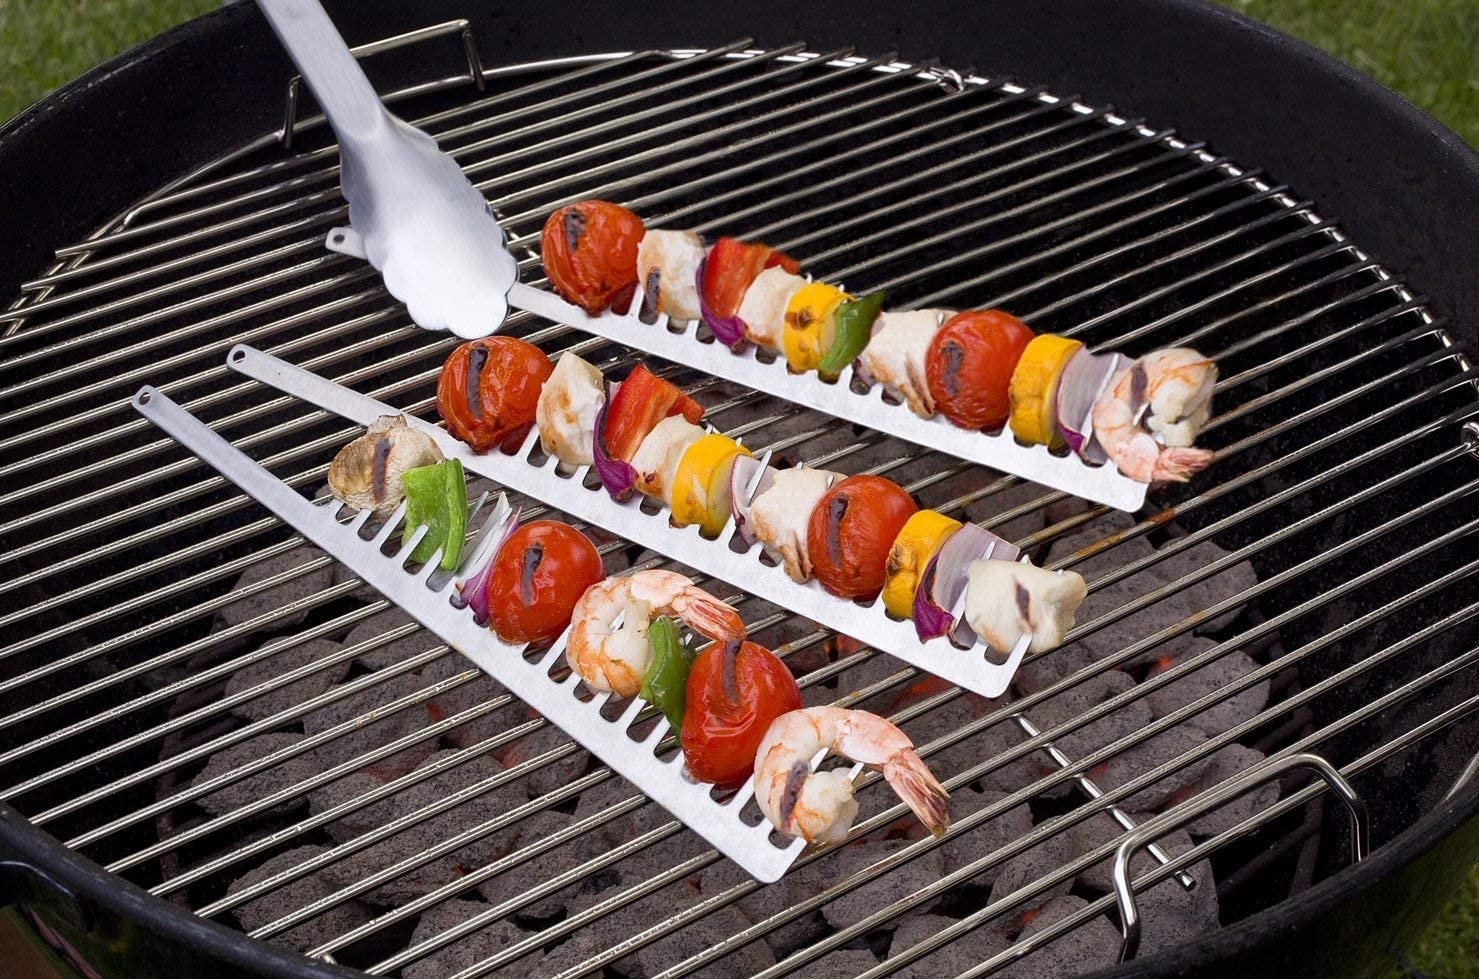 a trio of stainless steel grilling combs filled with fresh veggies and seafood